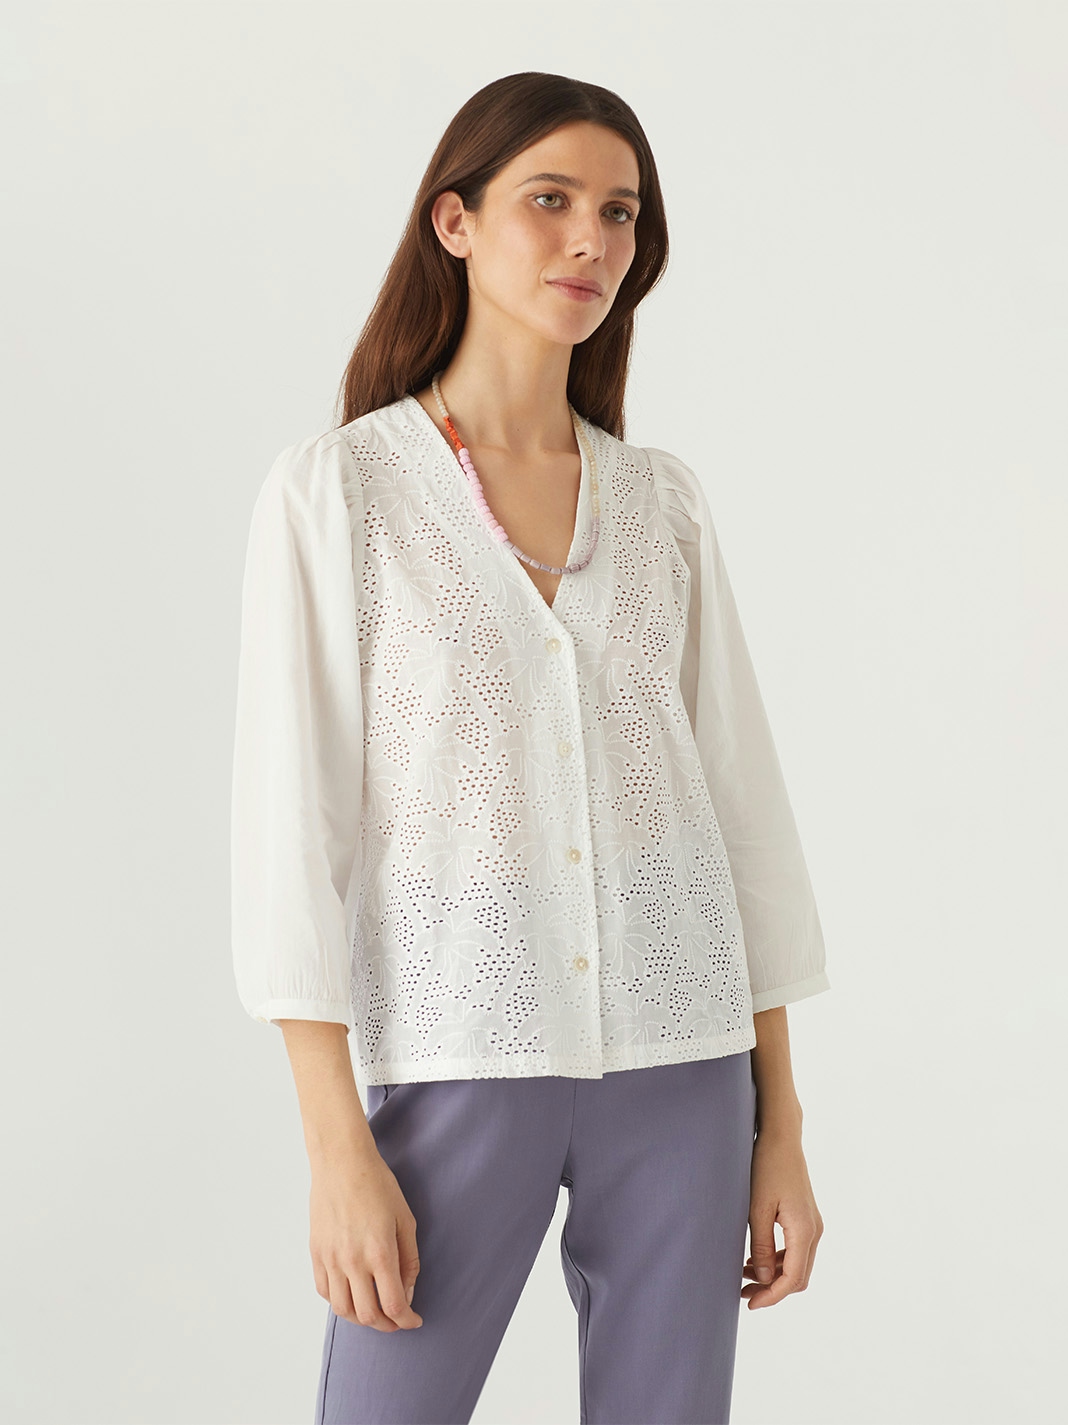 Swiss embroidered top